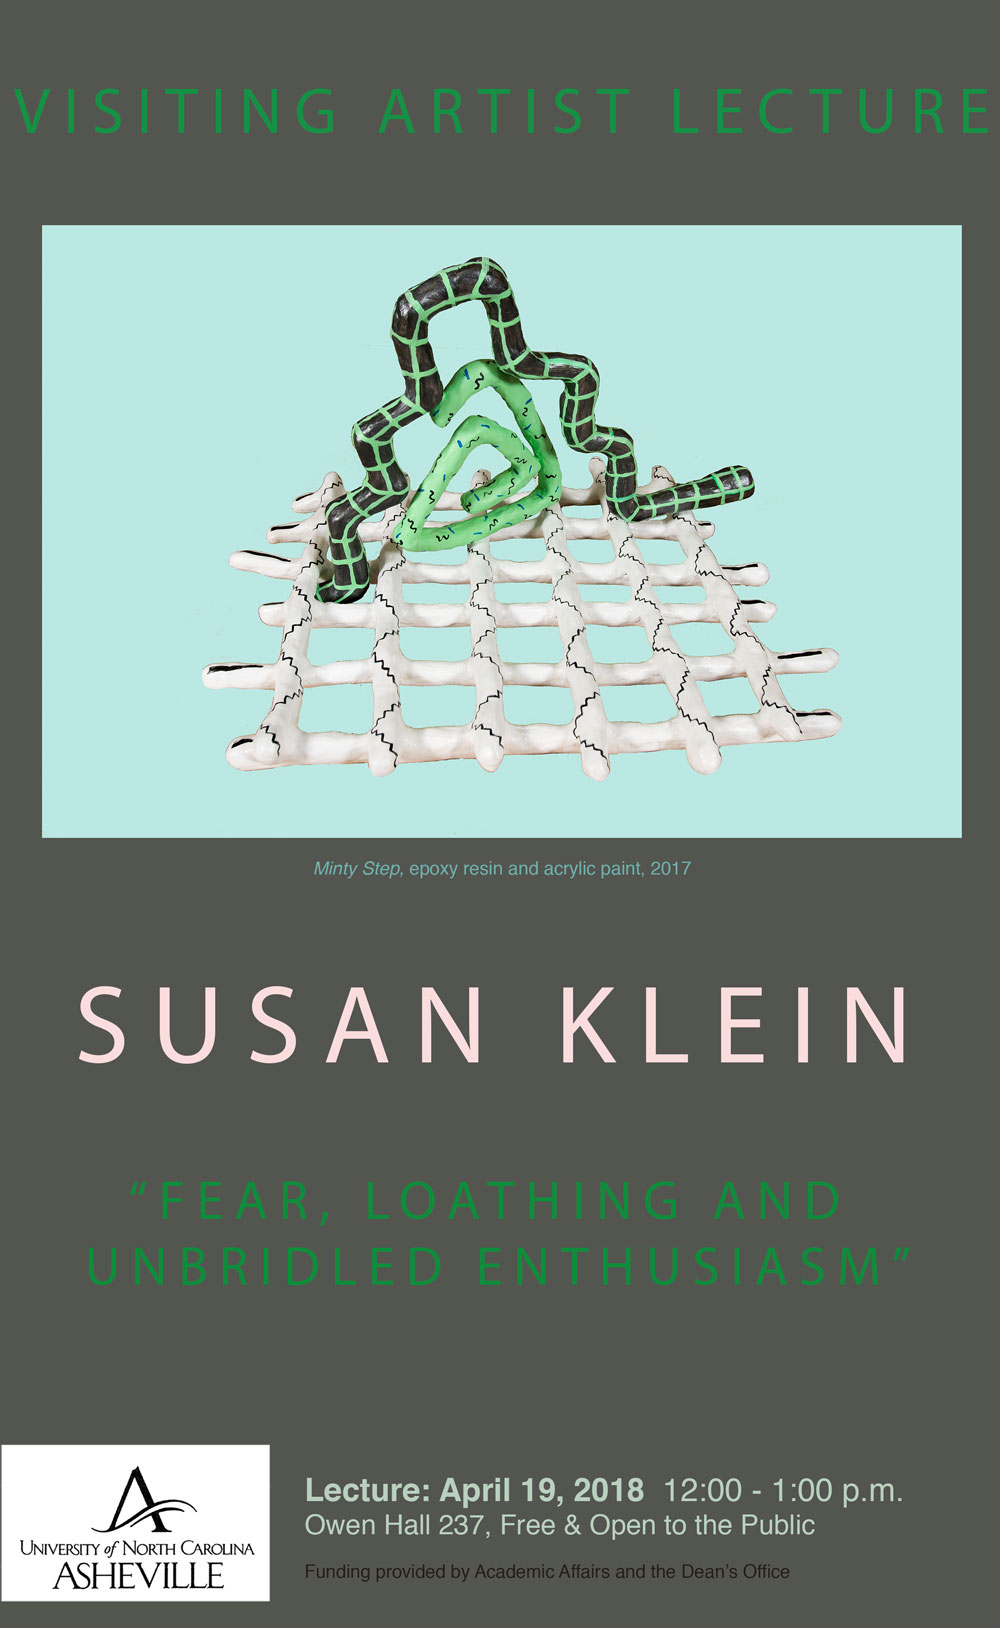 Susan Klein lecture poster